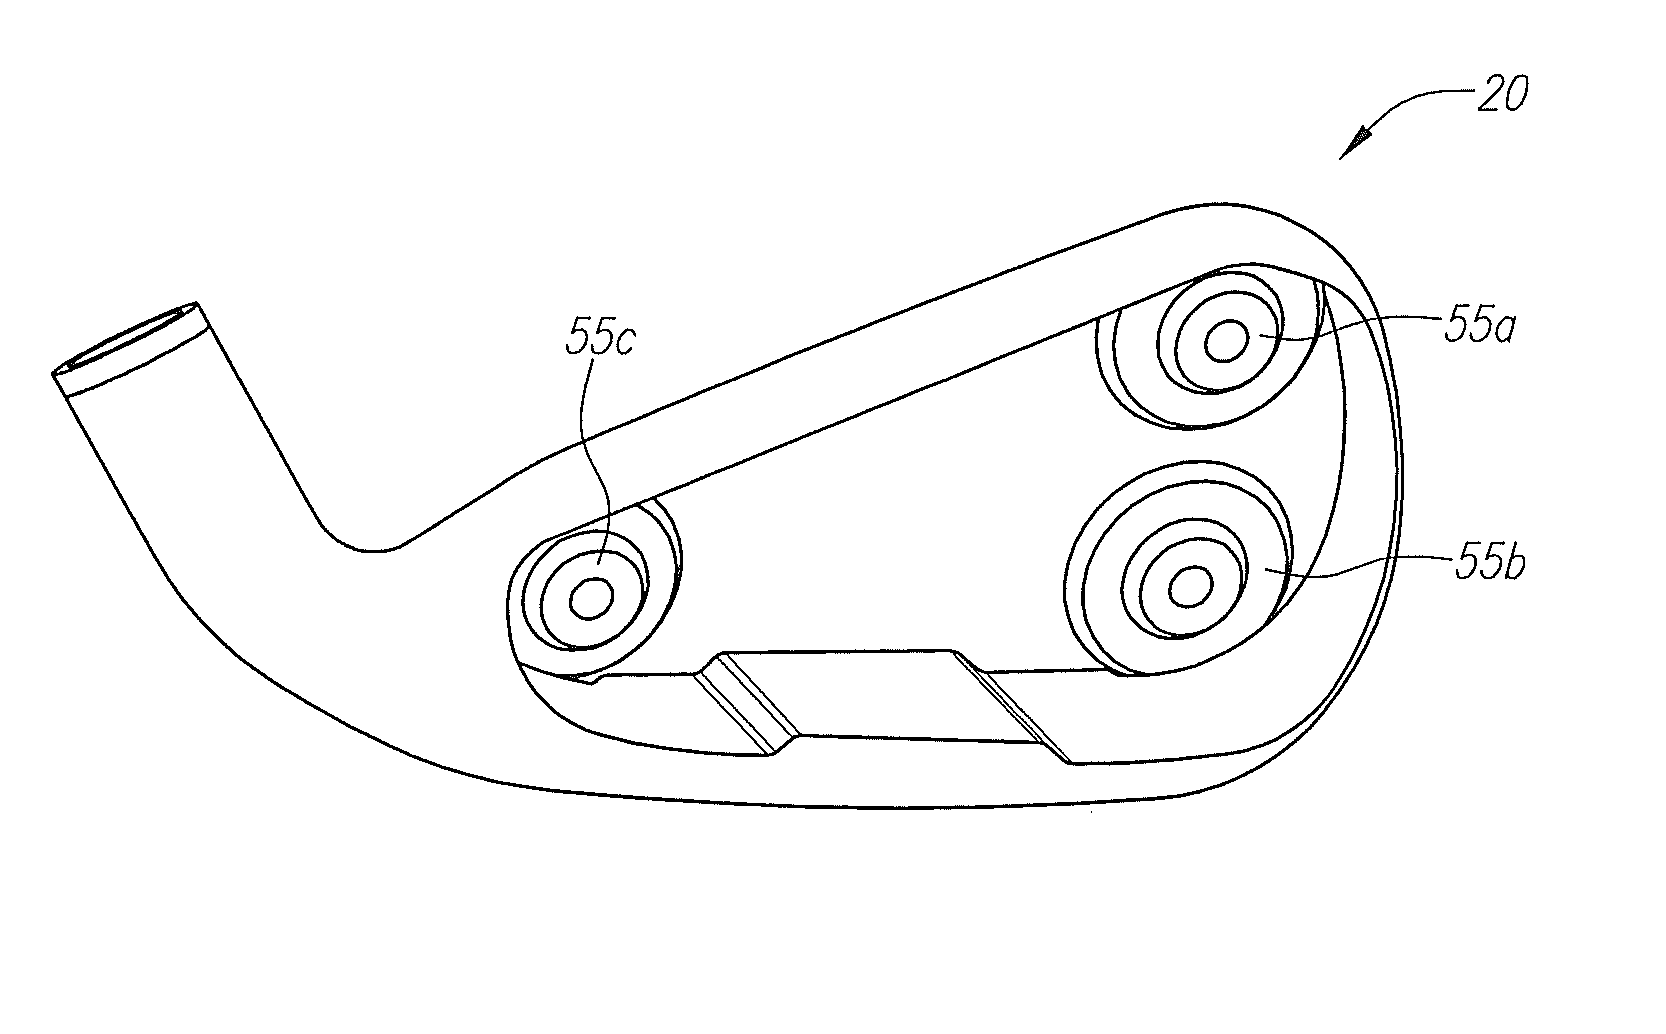 Iron-type golf club head having movable weights